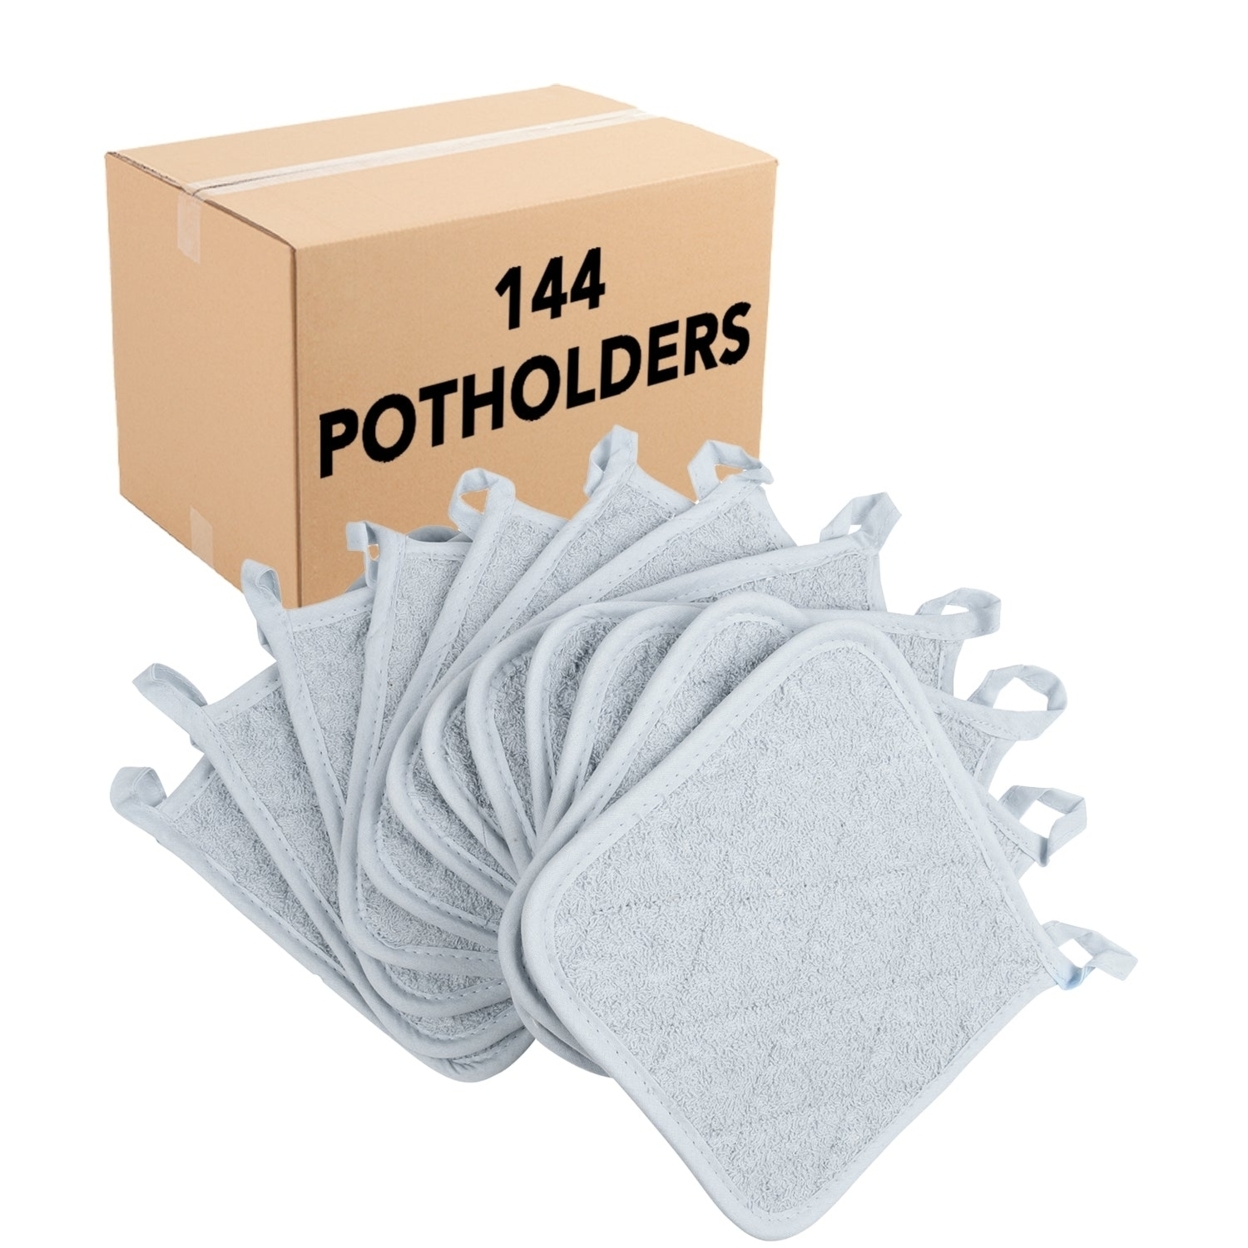 Pot Holder 12-Pack, Cotton Terry, Looped, 7x7 in., Six Colors, Buy a 12-Pack or a Case of 144. - Grey, Case of 144